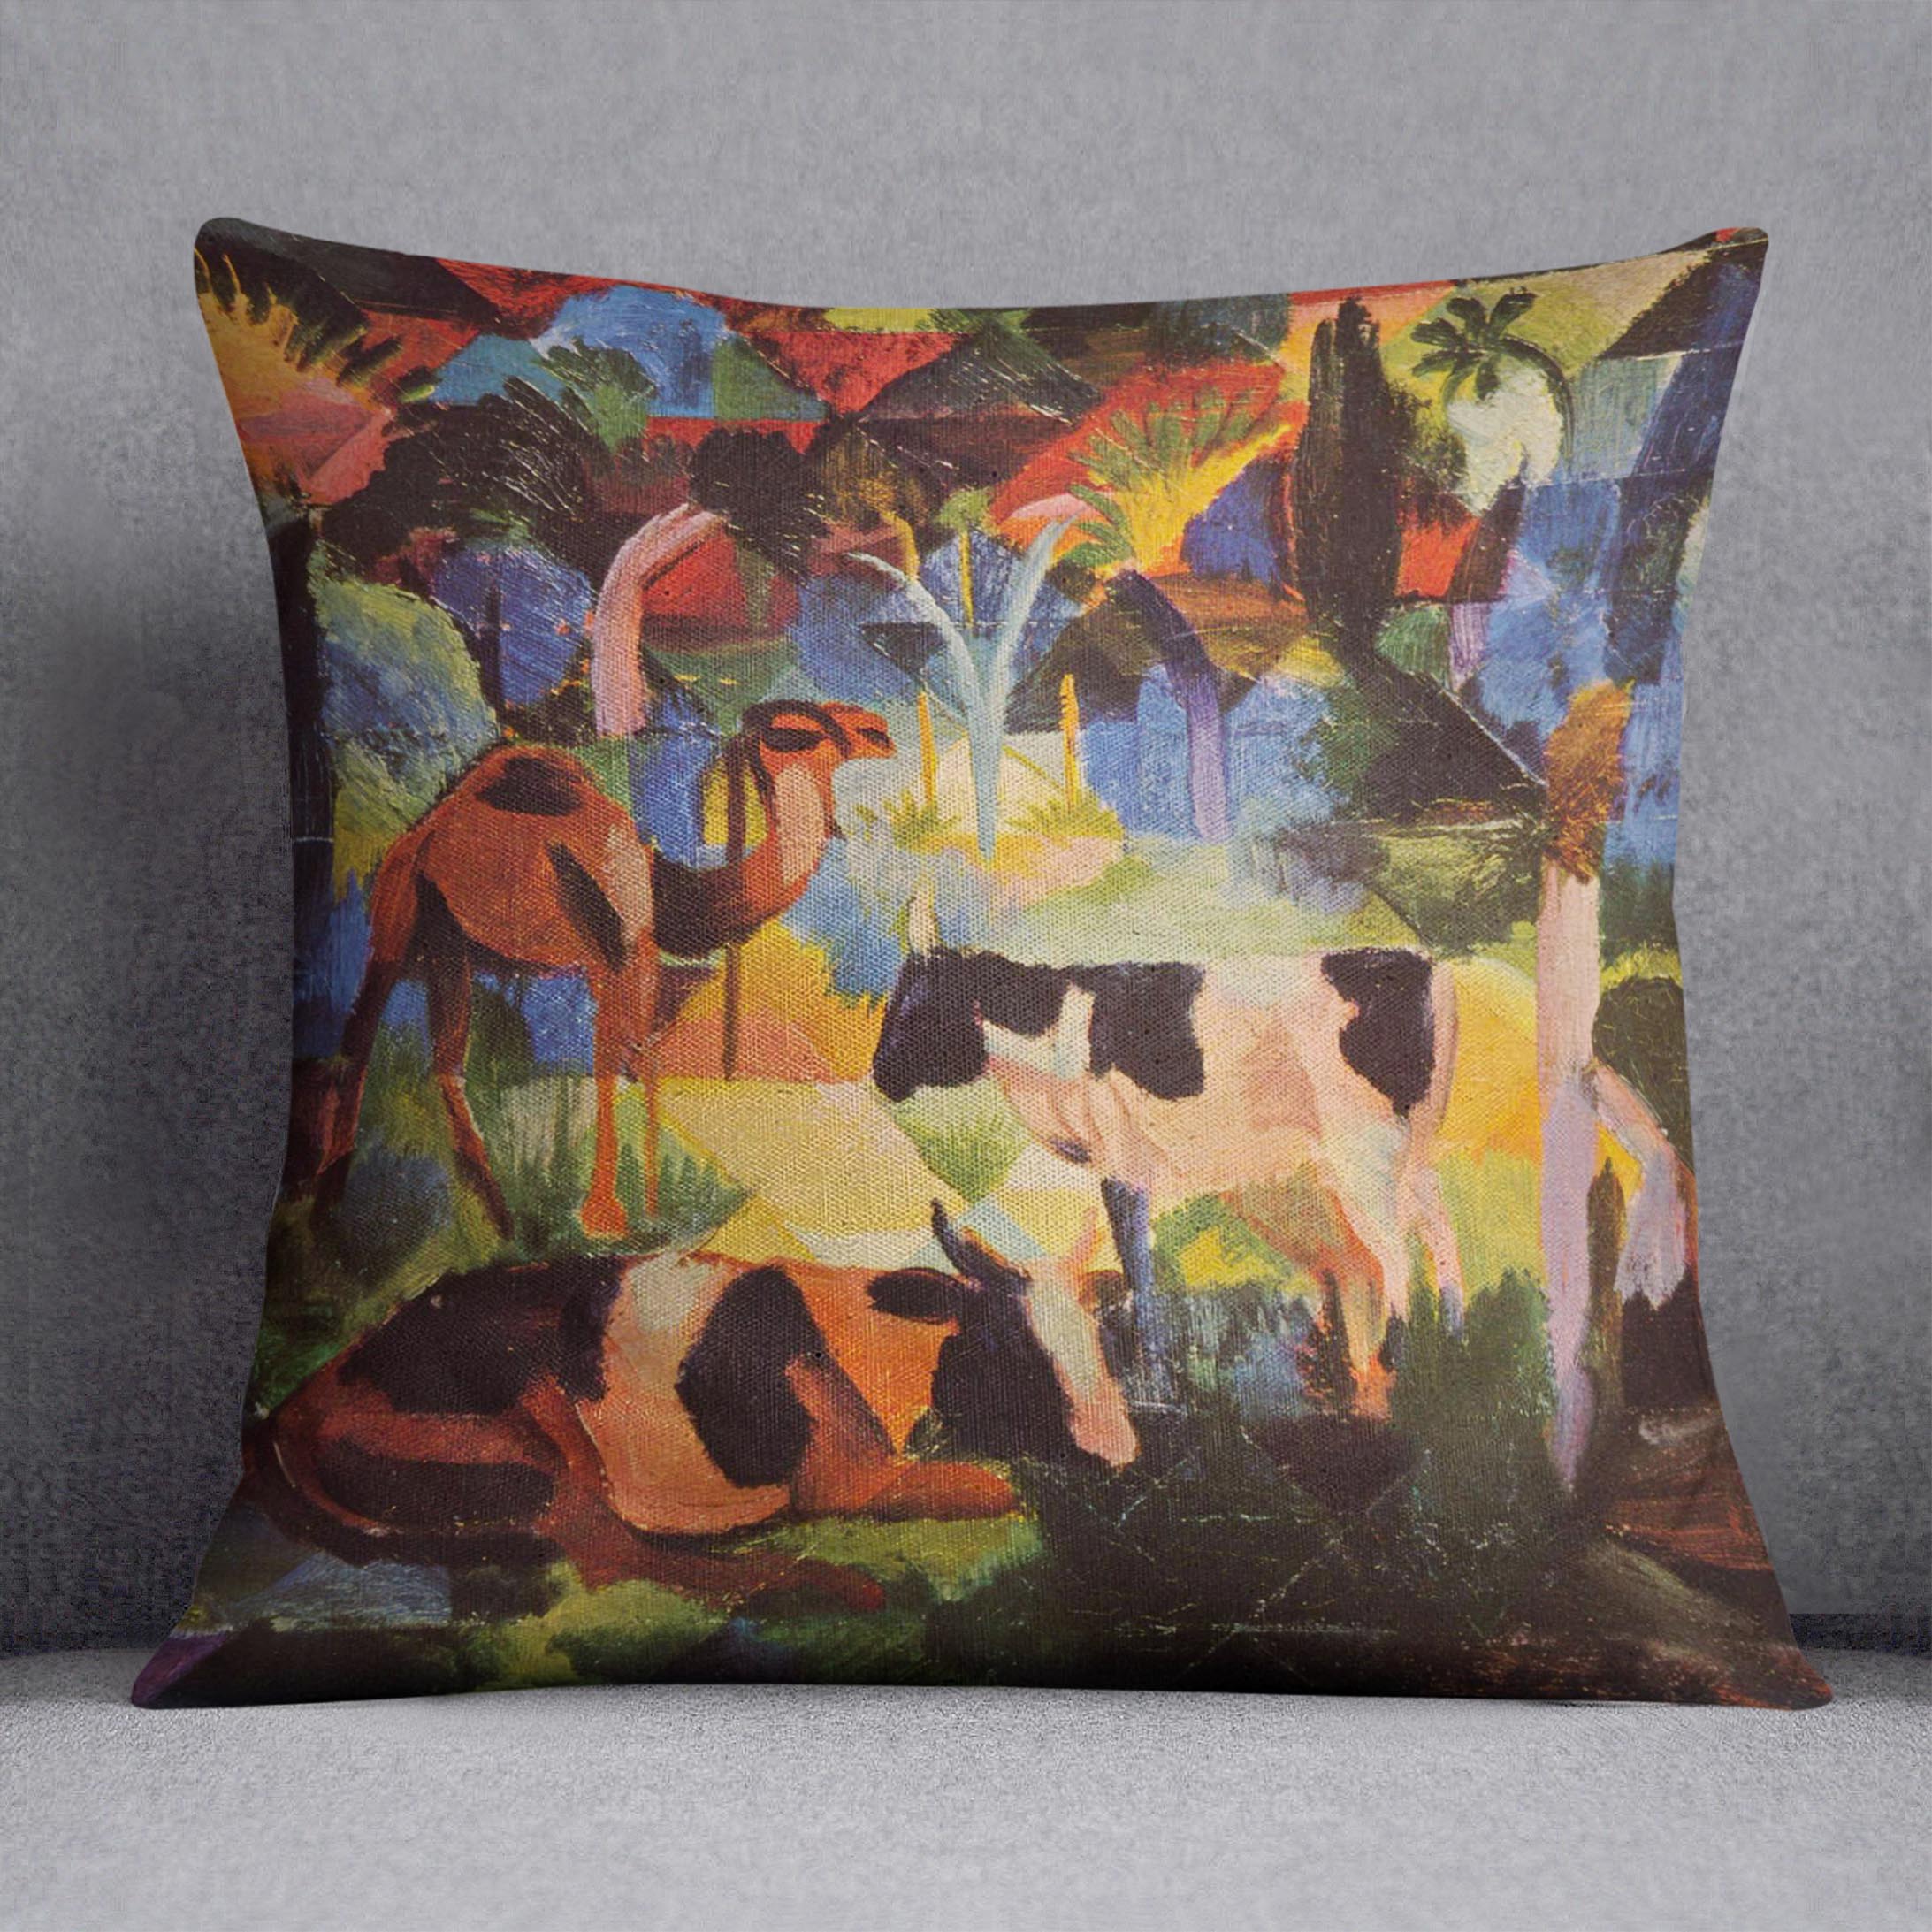 Landscape with cows and camels by Macke Cushion - Canvas Art Rocks - 1